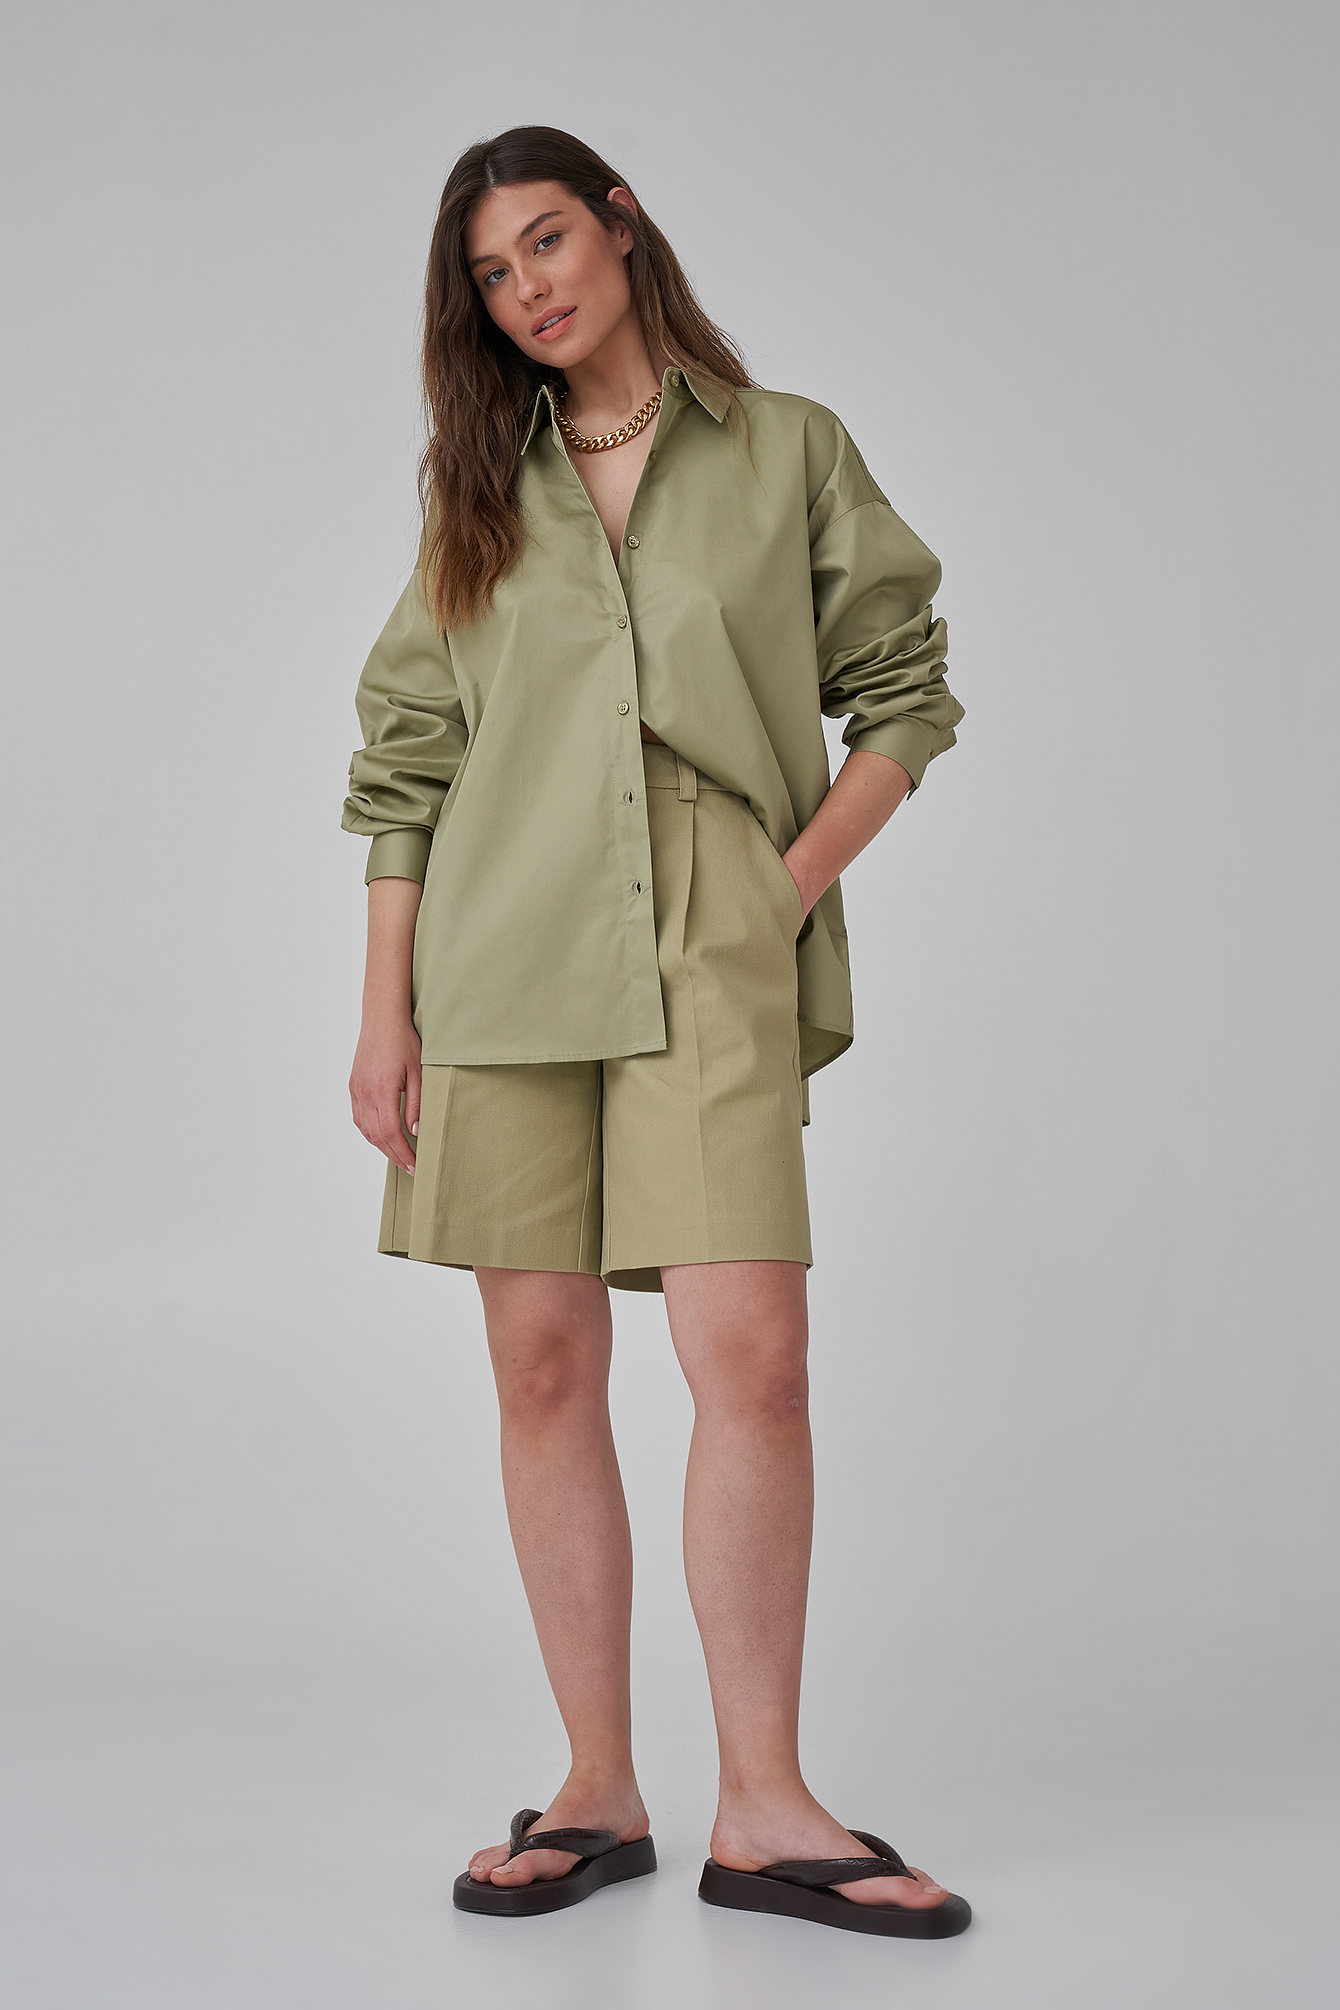 Oversized Cotton Shirt Outfit.